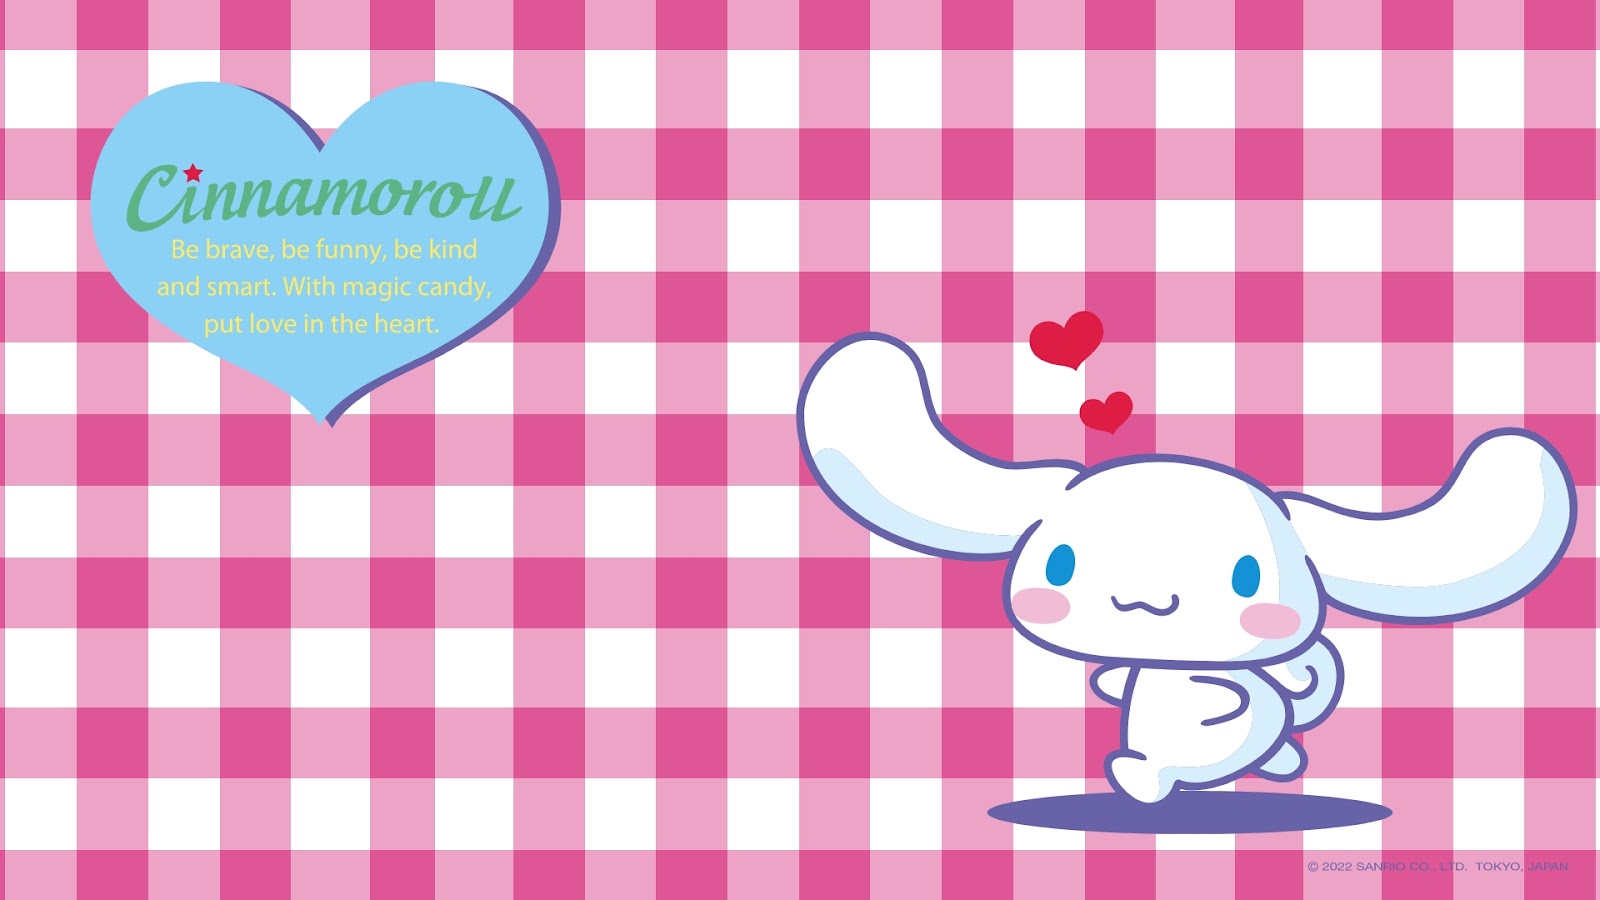 Cinnamoroll Things to Get, Food to Eat and Events to Visit for 20th Anniversary, Our Best Buy Picks